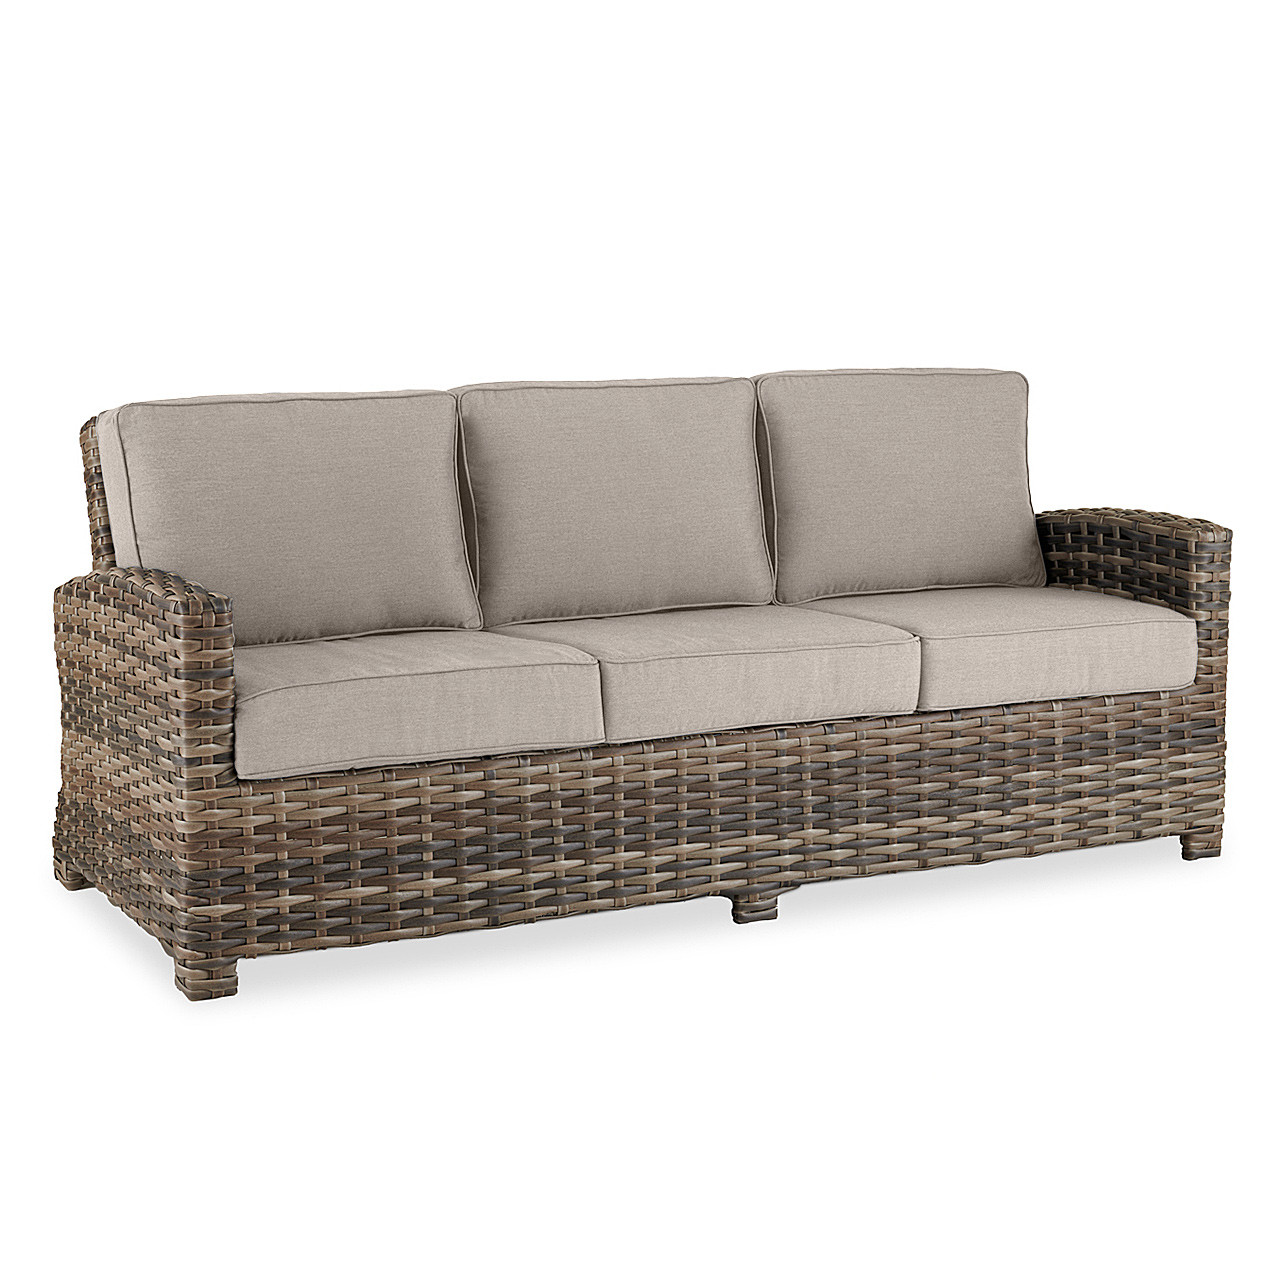 Contempo Husk Outdoor Wicker with Cushions 4 Piece Sofa Group + 32 in. Sq. Glass Top Coffee Table